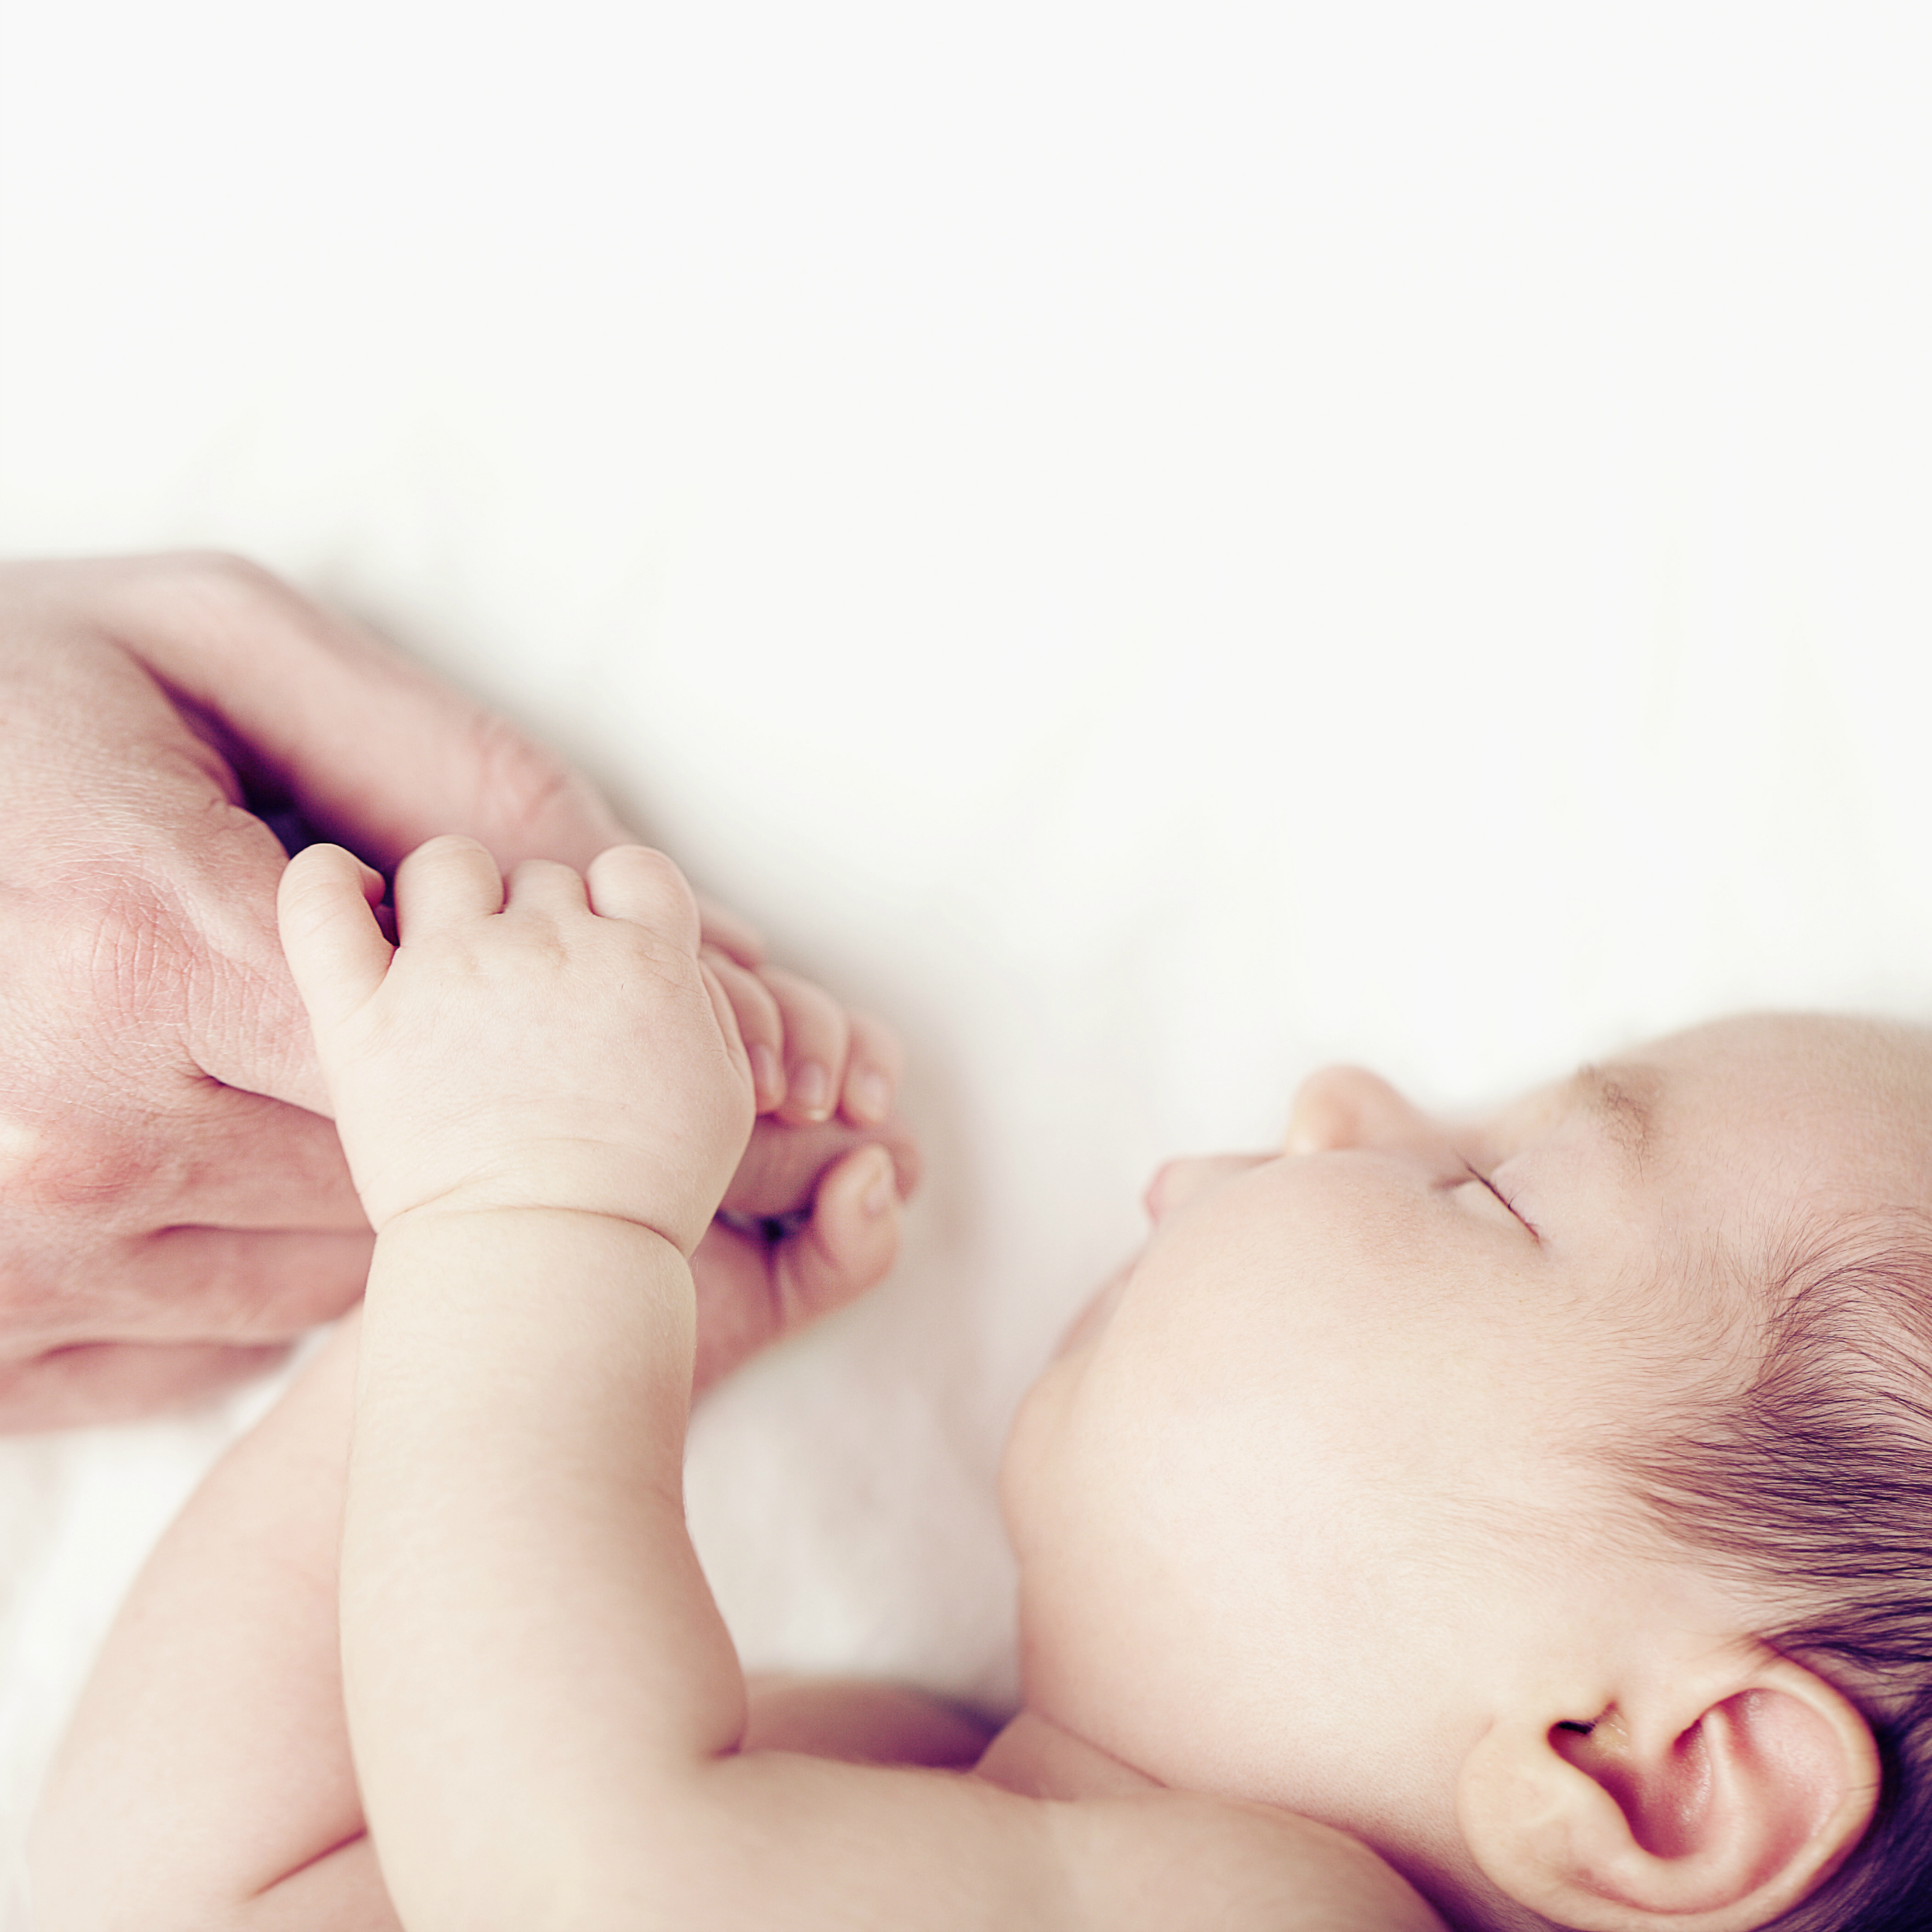 12 Useful Ways Partners Can Support Breastfeeding Moms